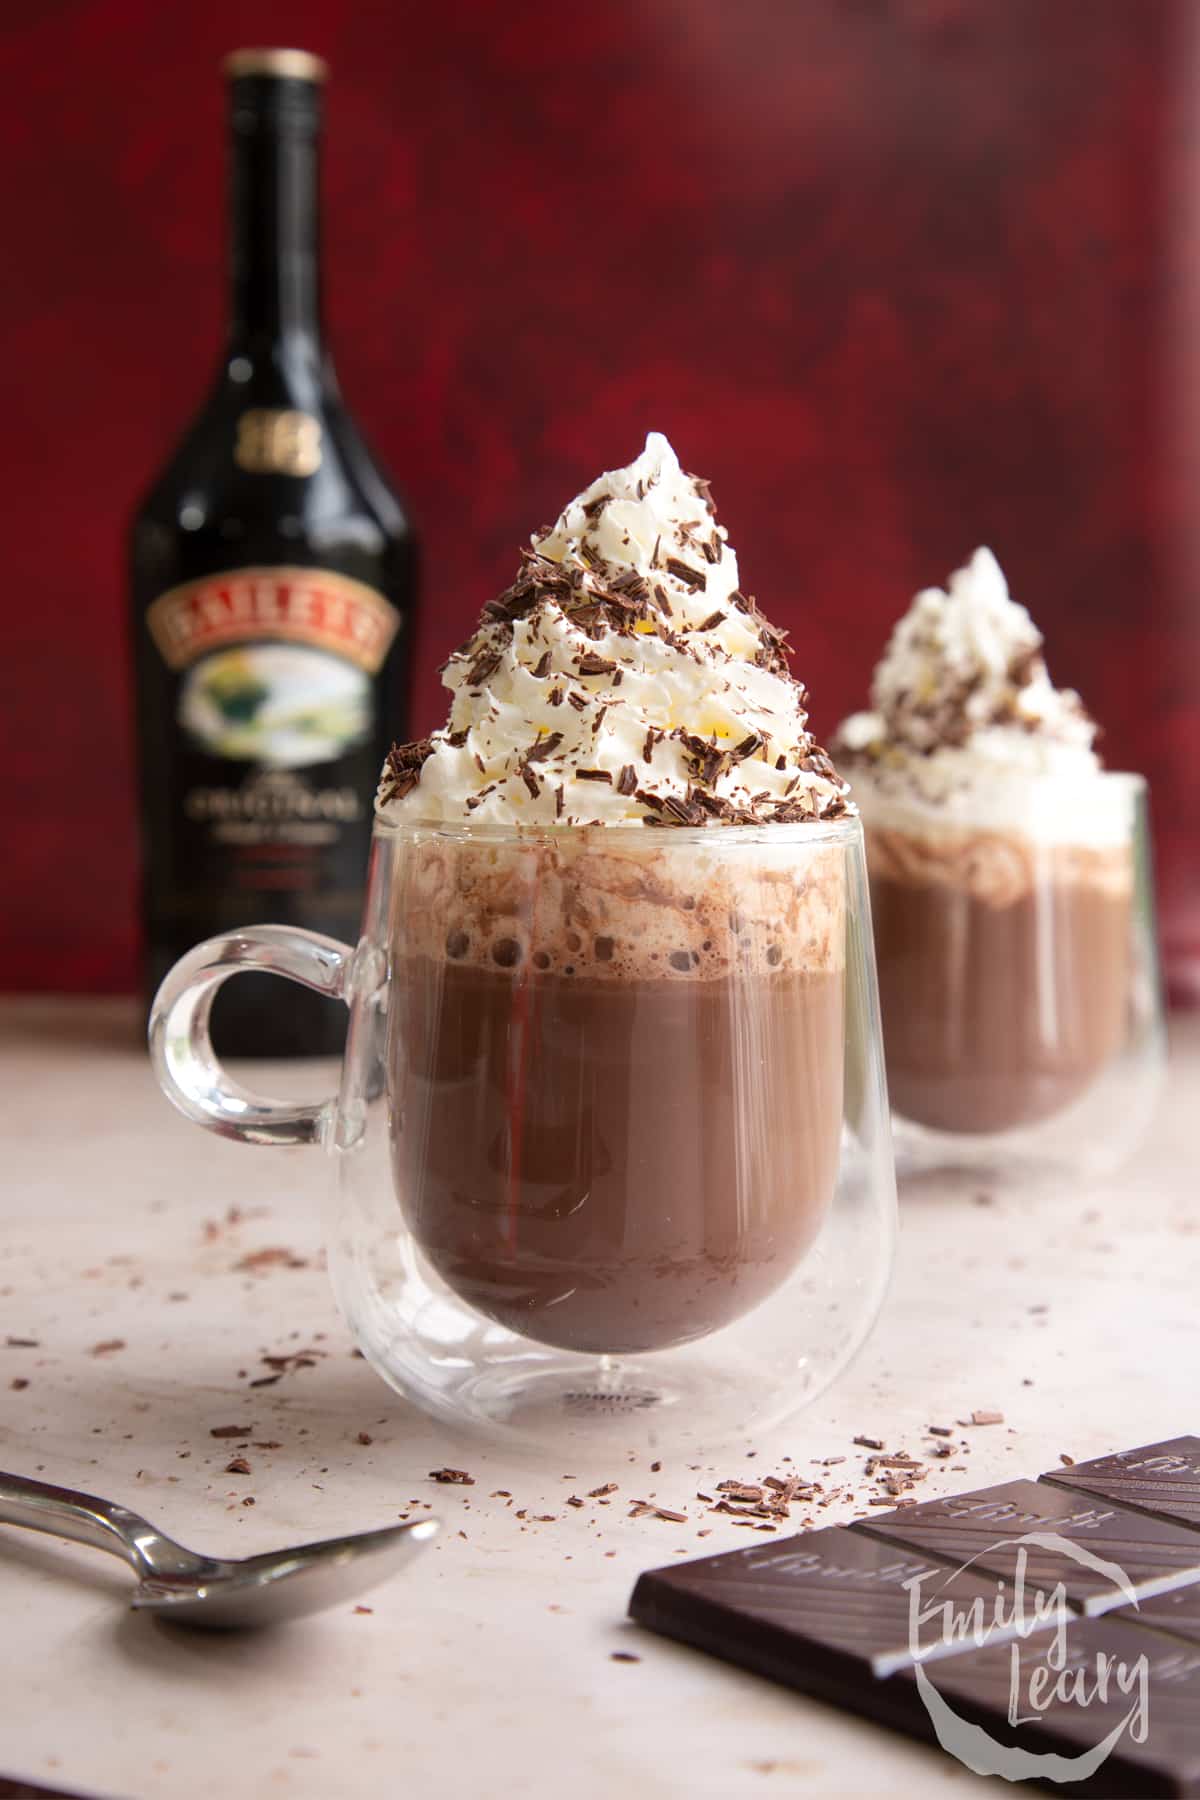 Two mugs of a rich Baileys hot chocolate recipe, topped with whipped cream and chocolate shavings.